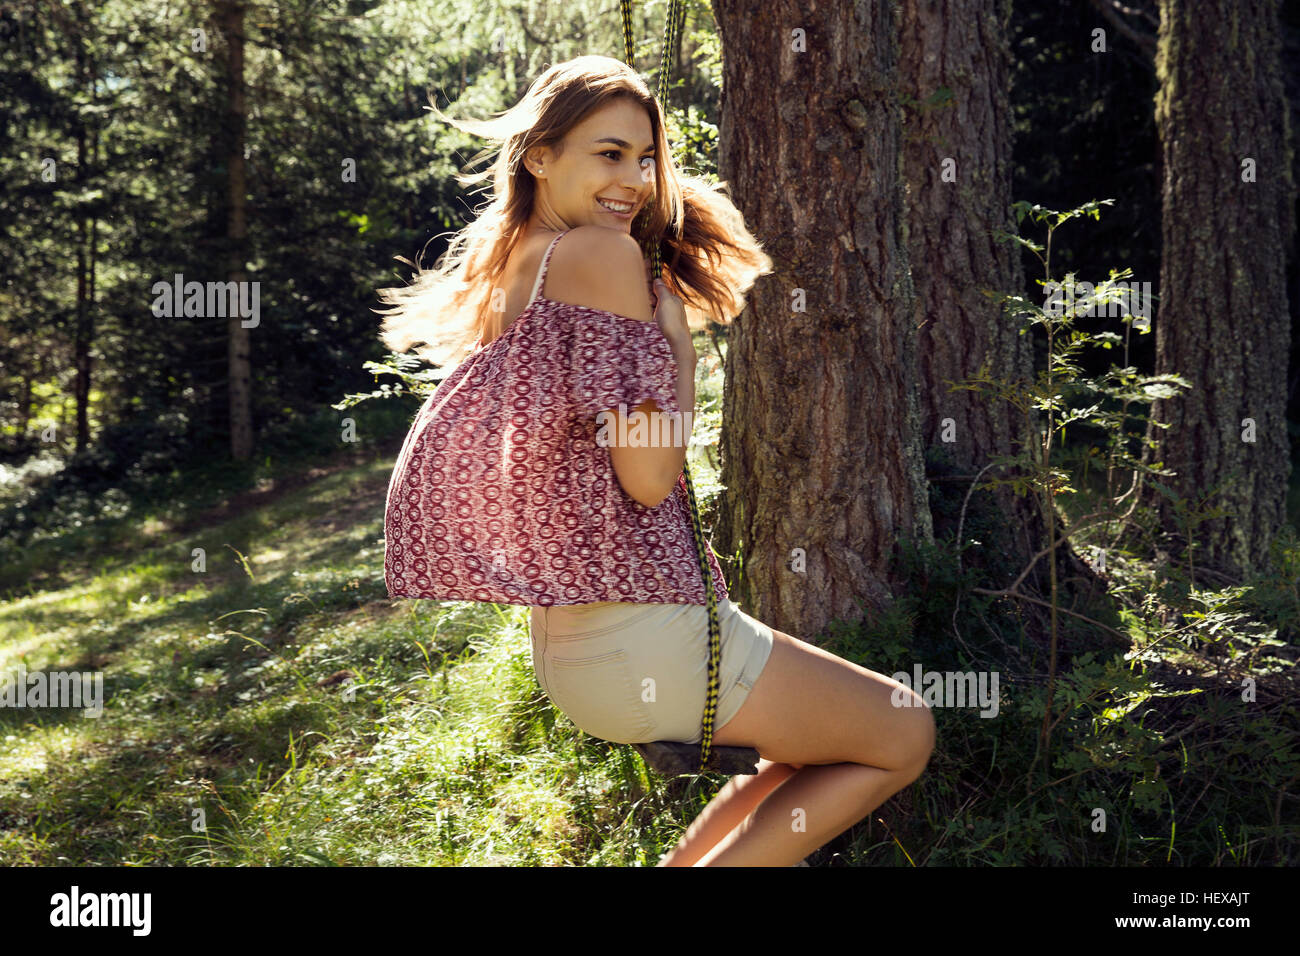 Young woman swinging on forest swing, Sattelbergalm, Tyrol, Austria Stock Photo